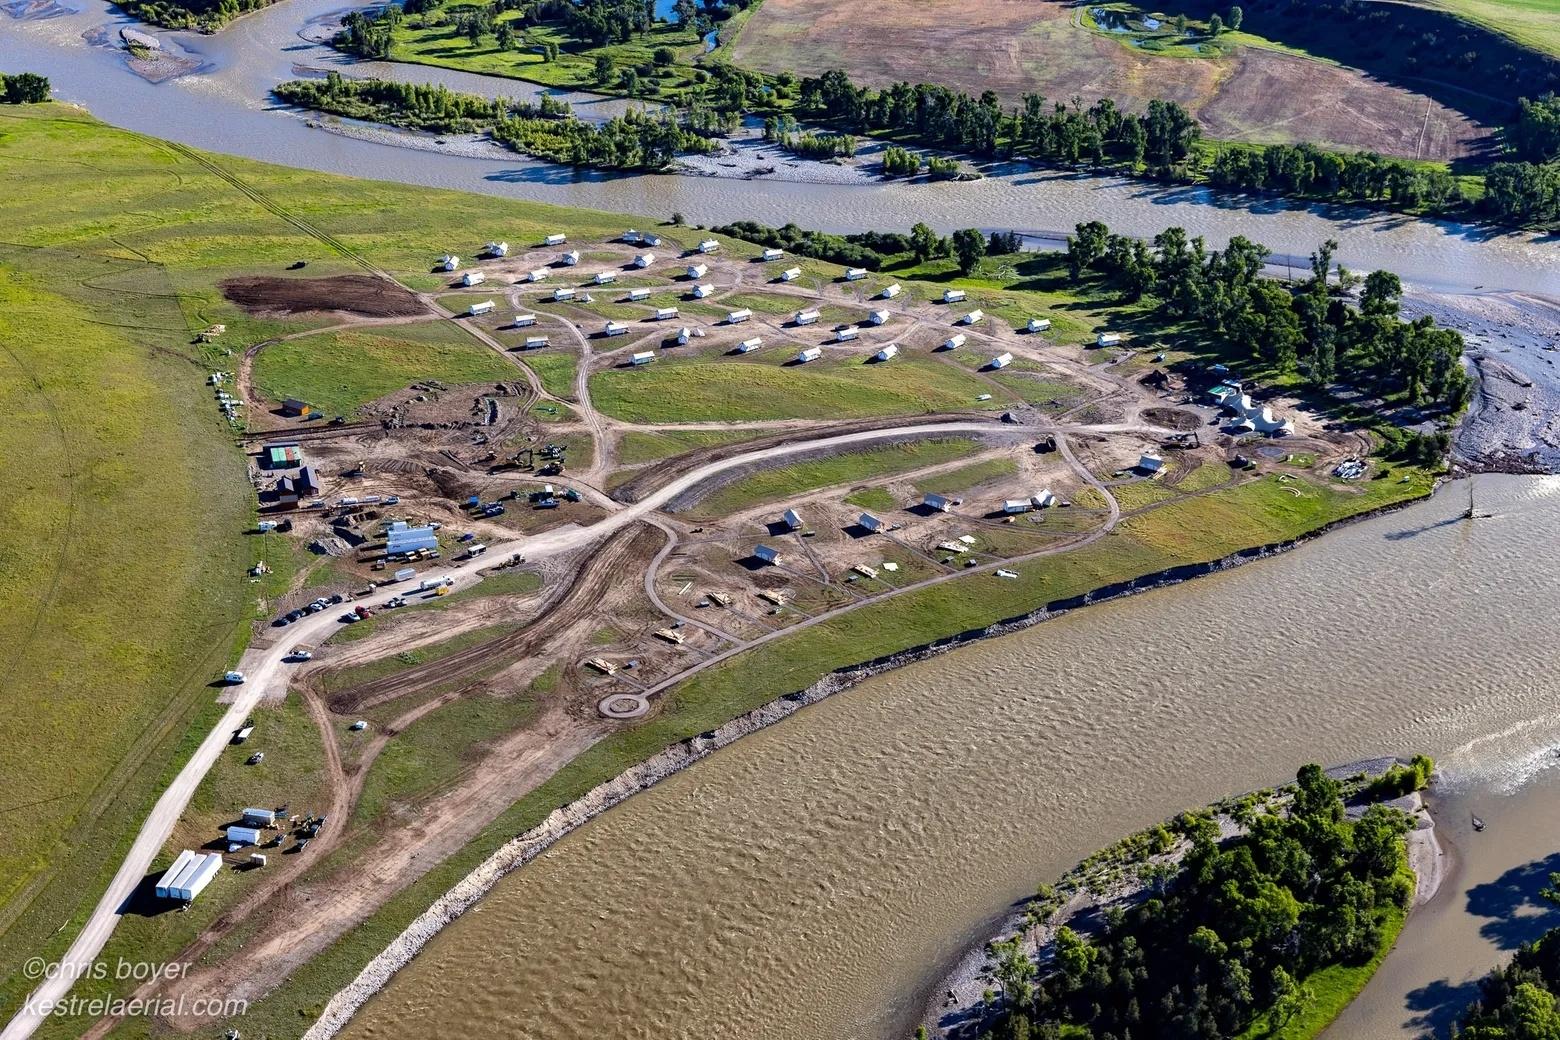 The glamping company Under Canvas opened a glampground along the banks of the Yellowstone River earlier this year, raising the ire of some Park County residents. A 2022 poll conducted by Friends of Park County showed “Loss of community character” was a serious concern expressed by 95 percent of respondents. Photo by Chris Boyer